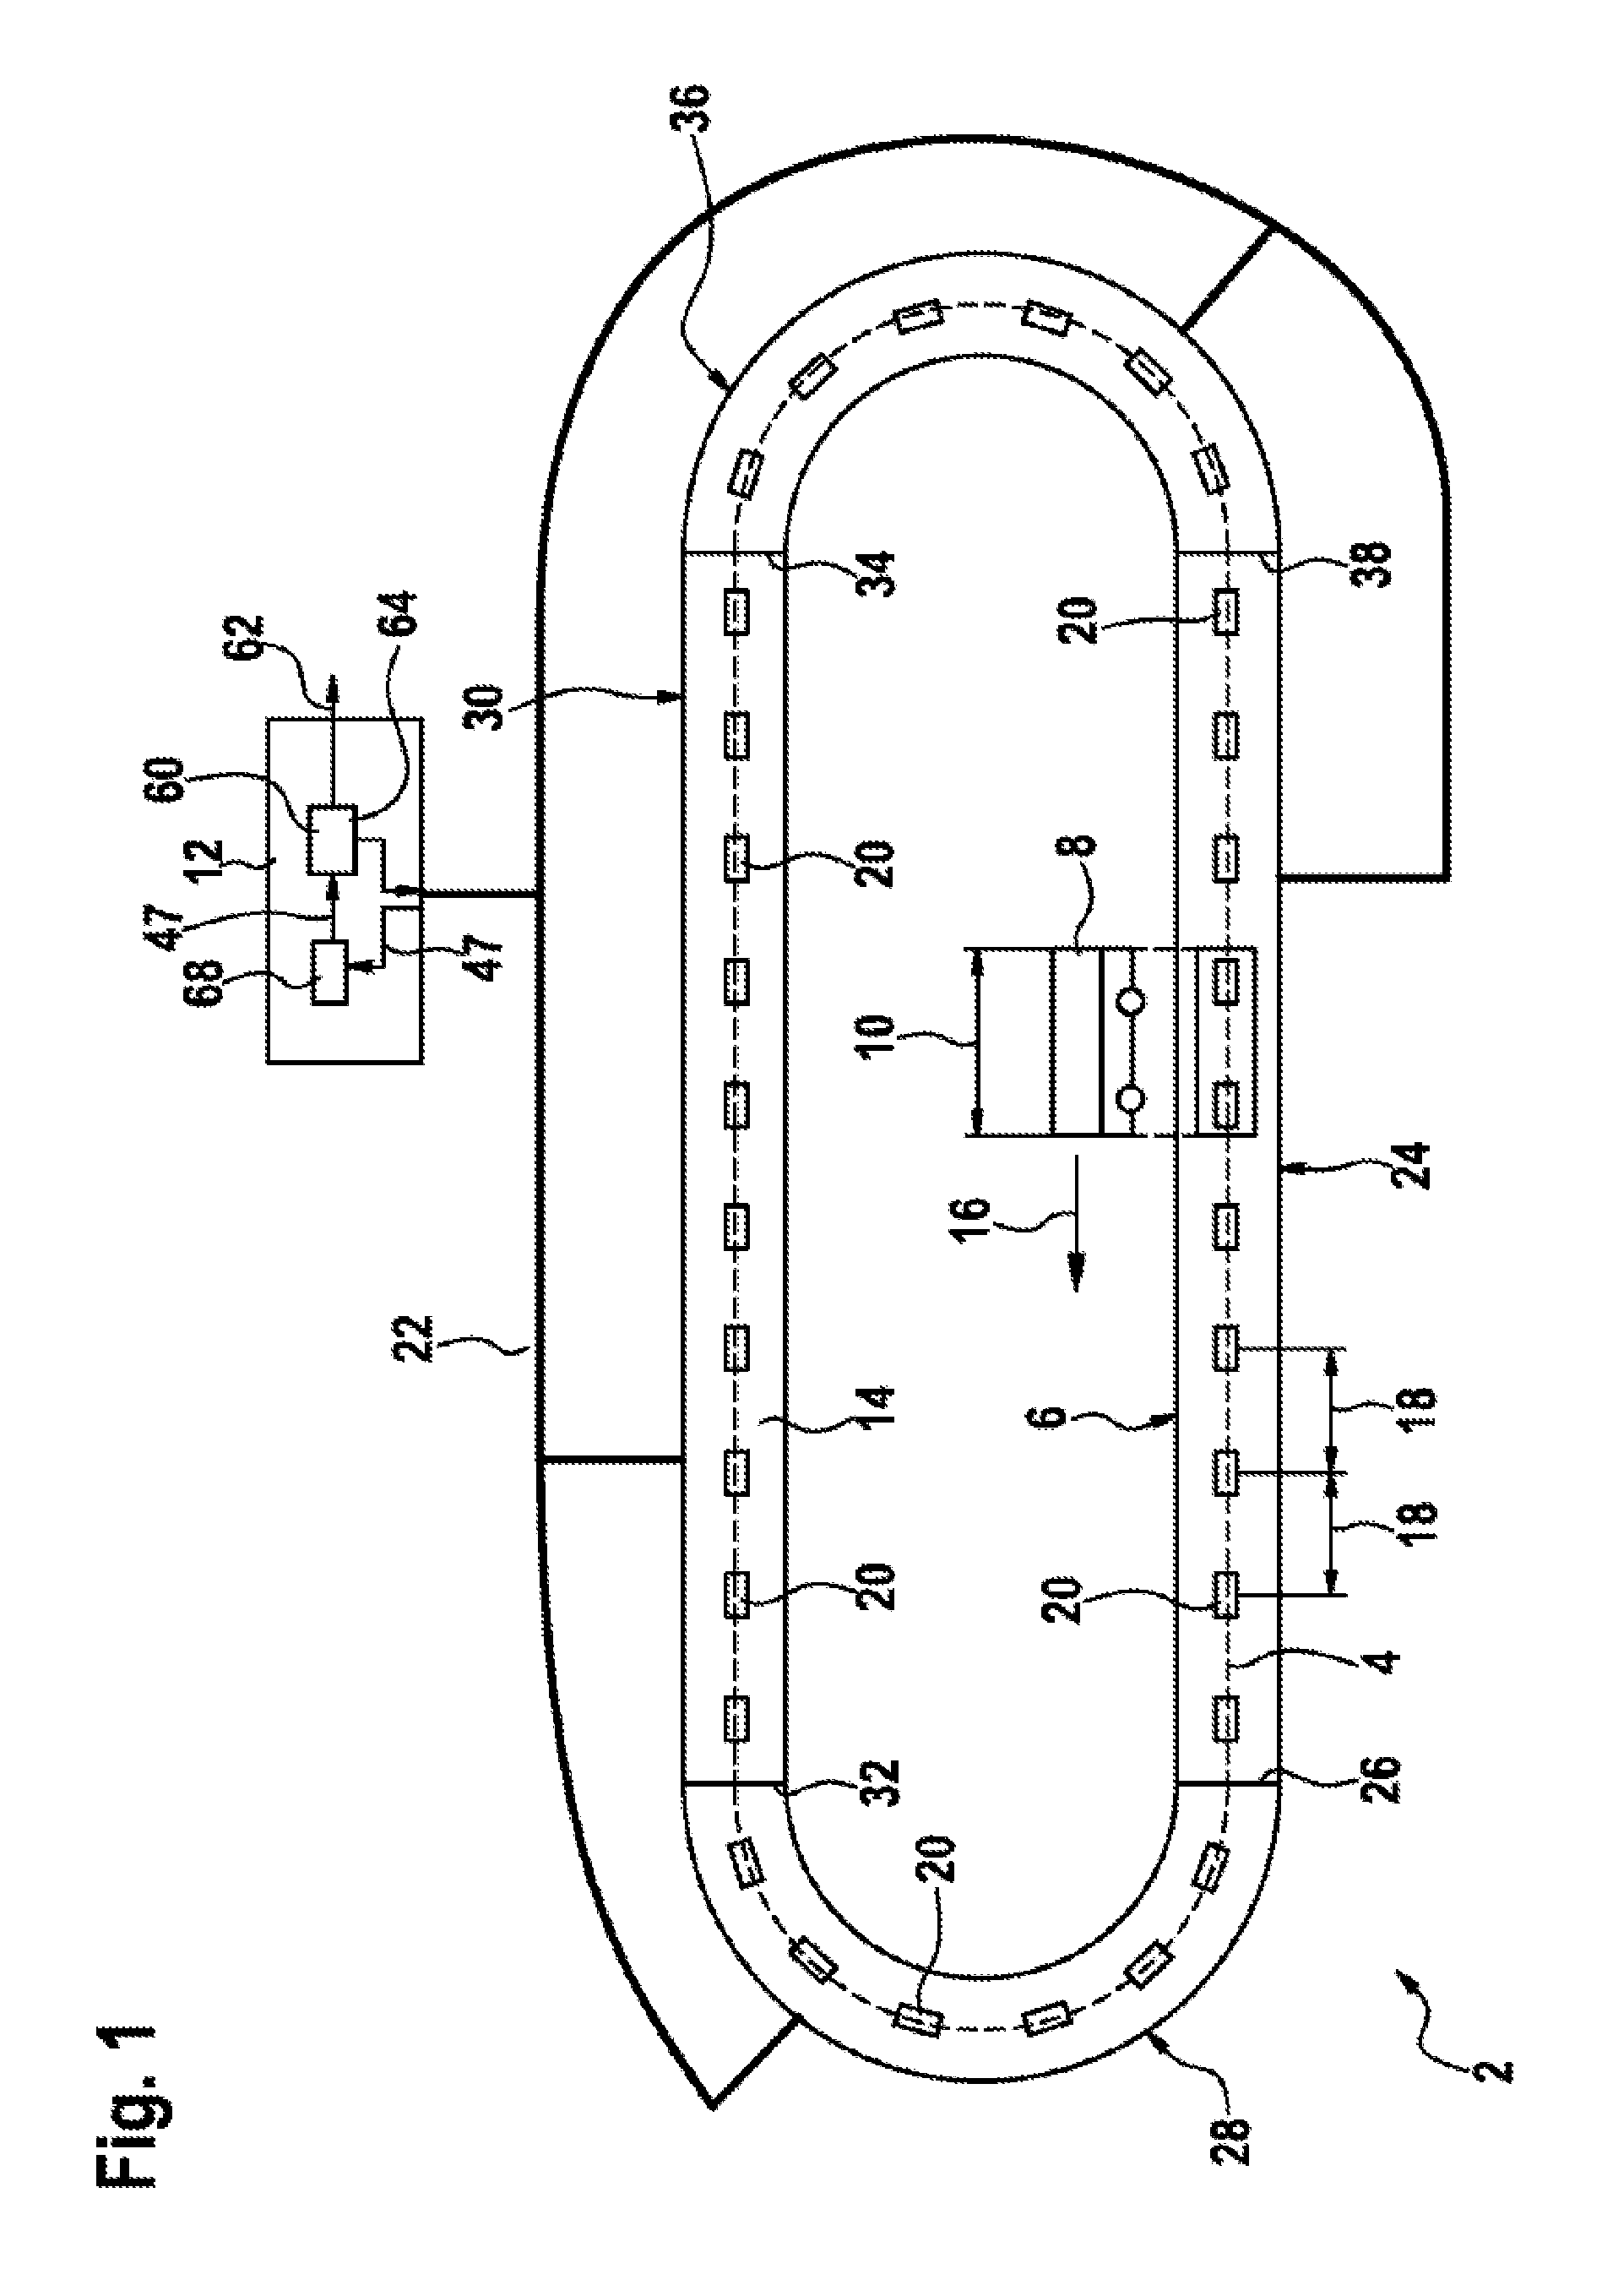 Incremental multi-position detection system for a revolving electromagnetic transfer system